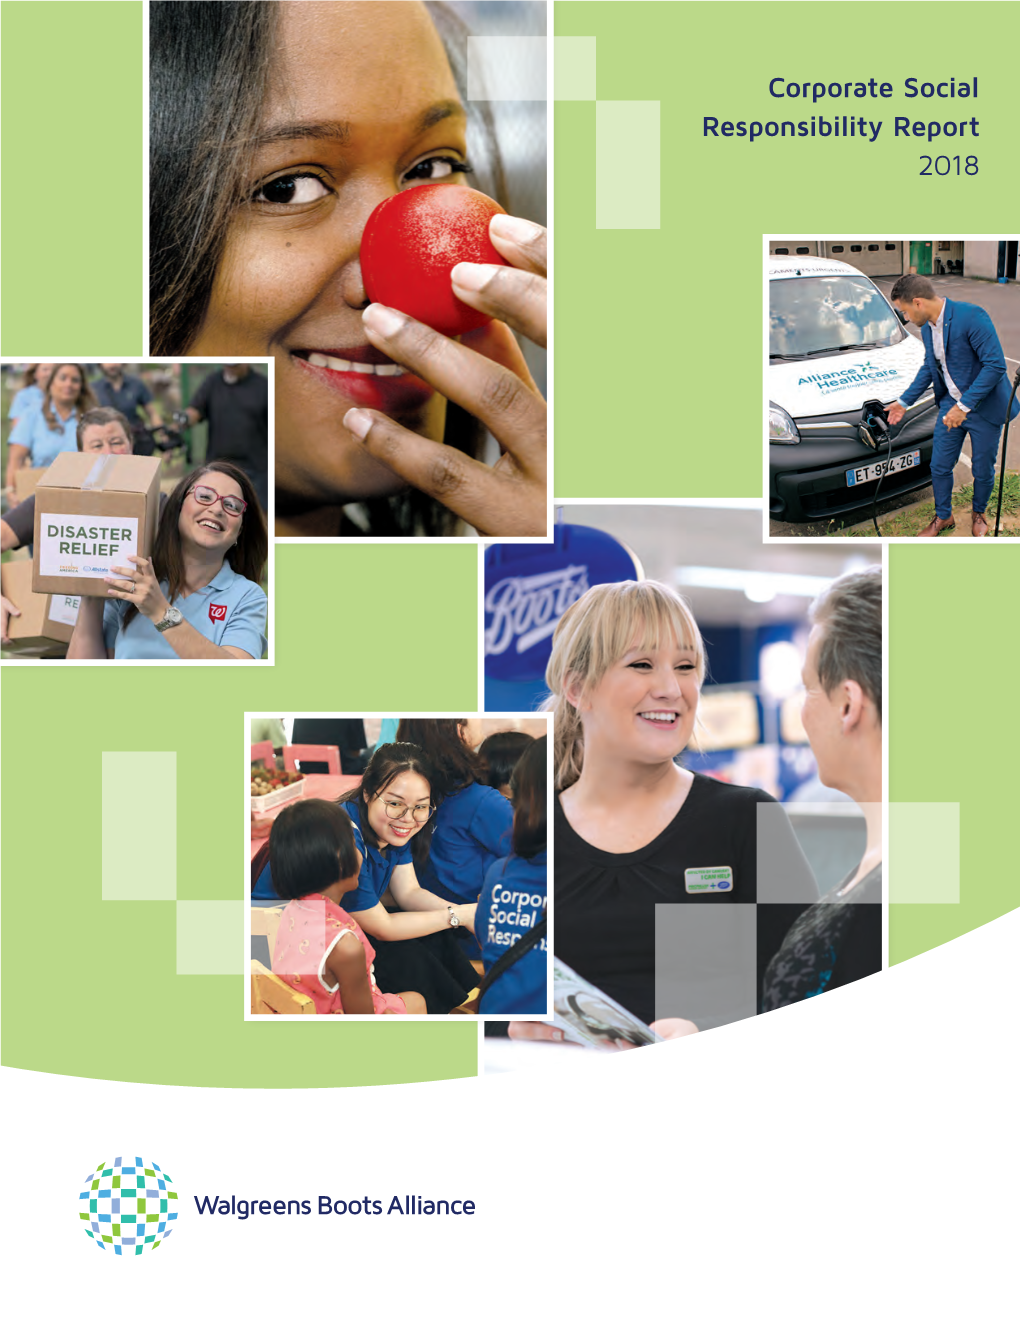 Walgreens Boots Alliance Corporate Social Responsibility Report 2018 1 a Message from Our CSR Committee Chairman